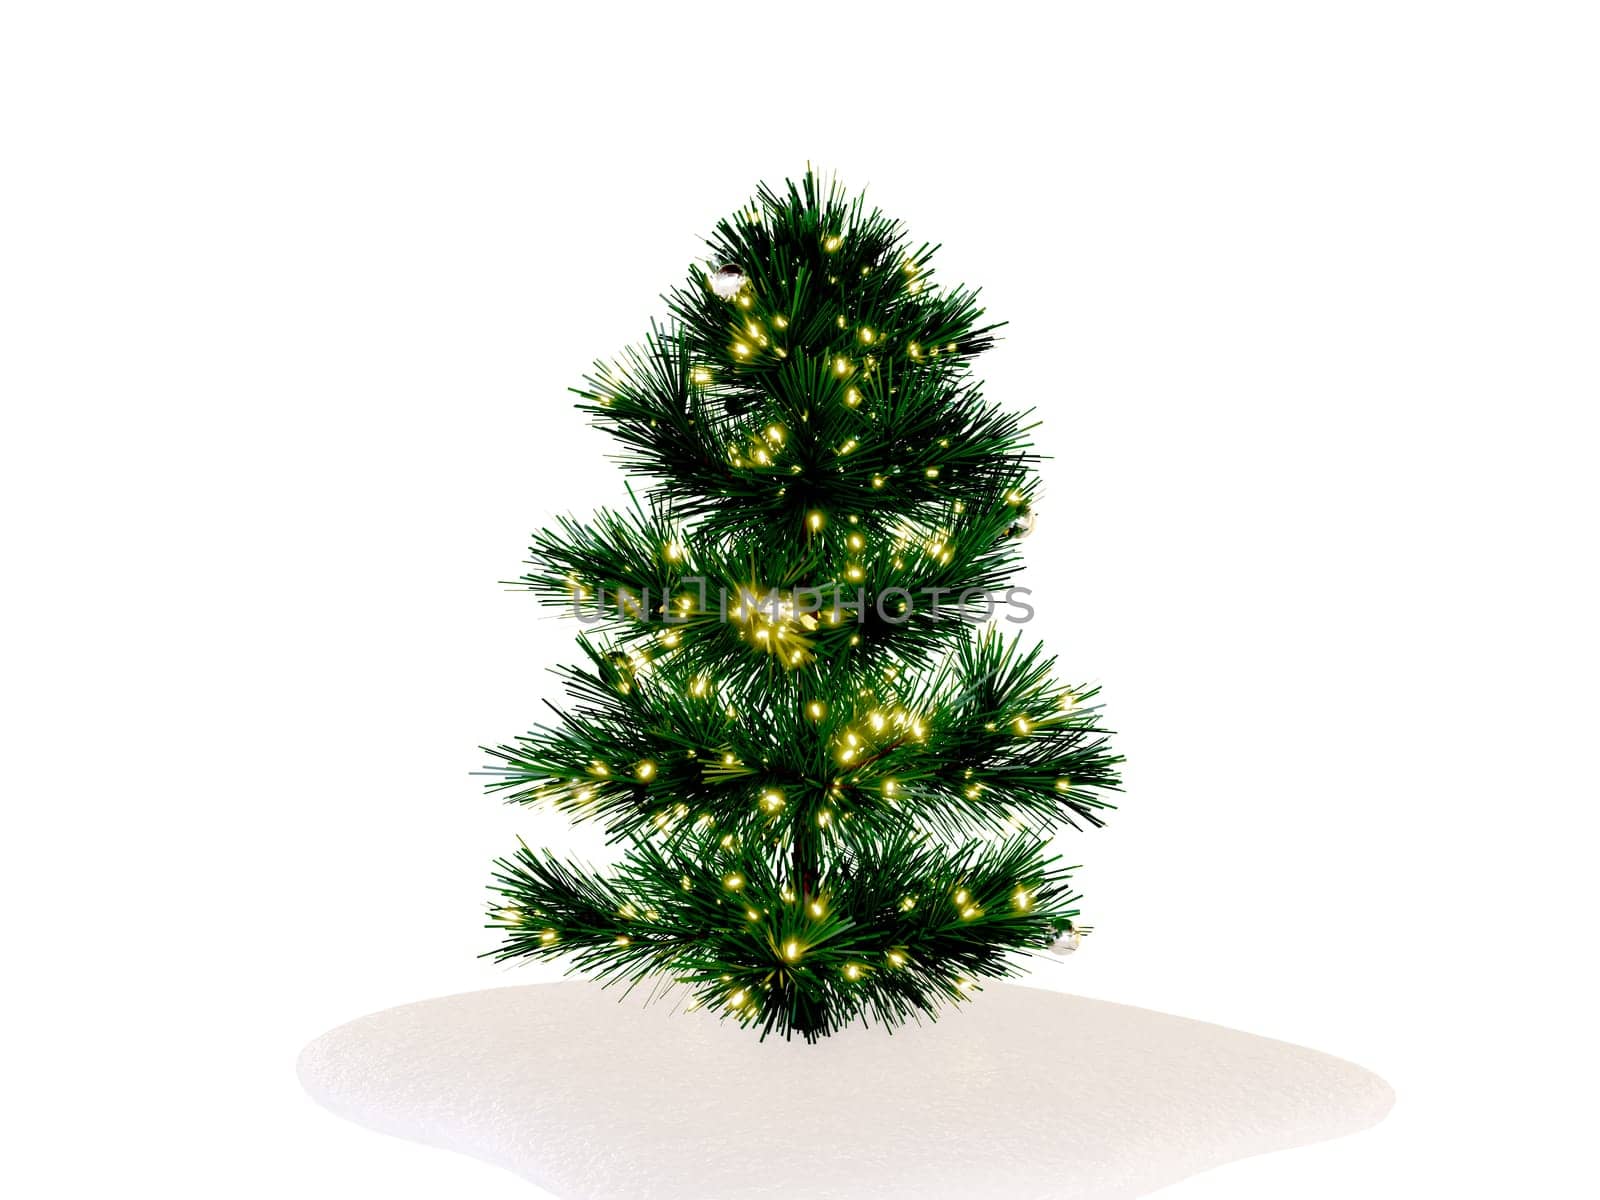 3D Christmas tree or pine tree 3D ready to decorate , isolated on transparent background by samunella